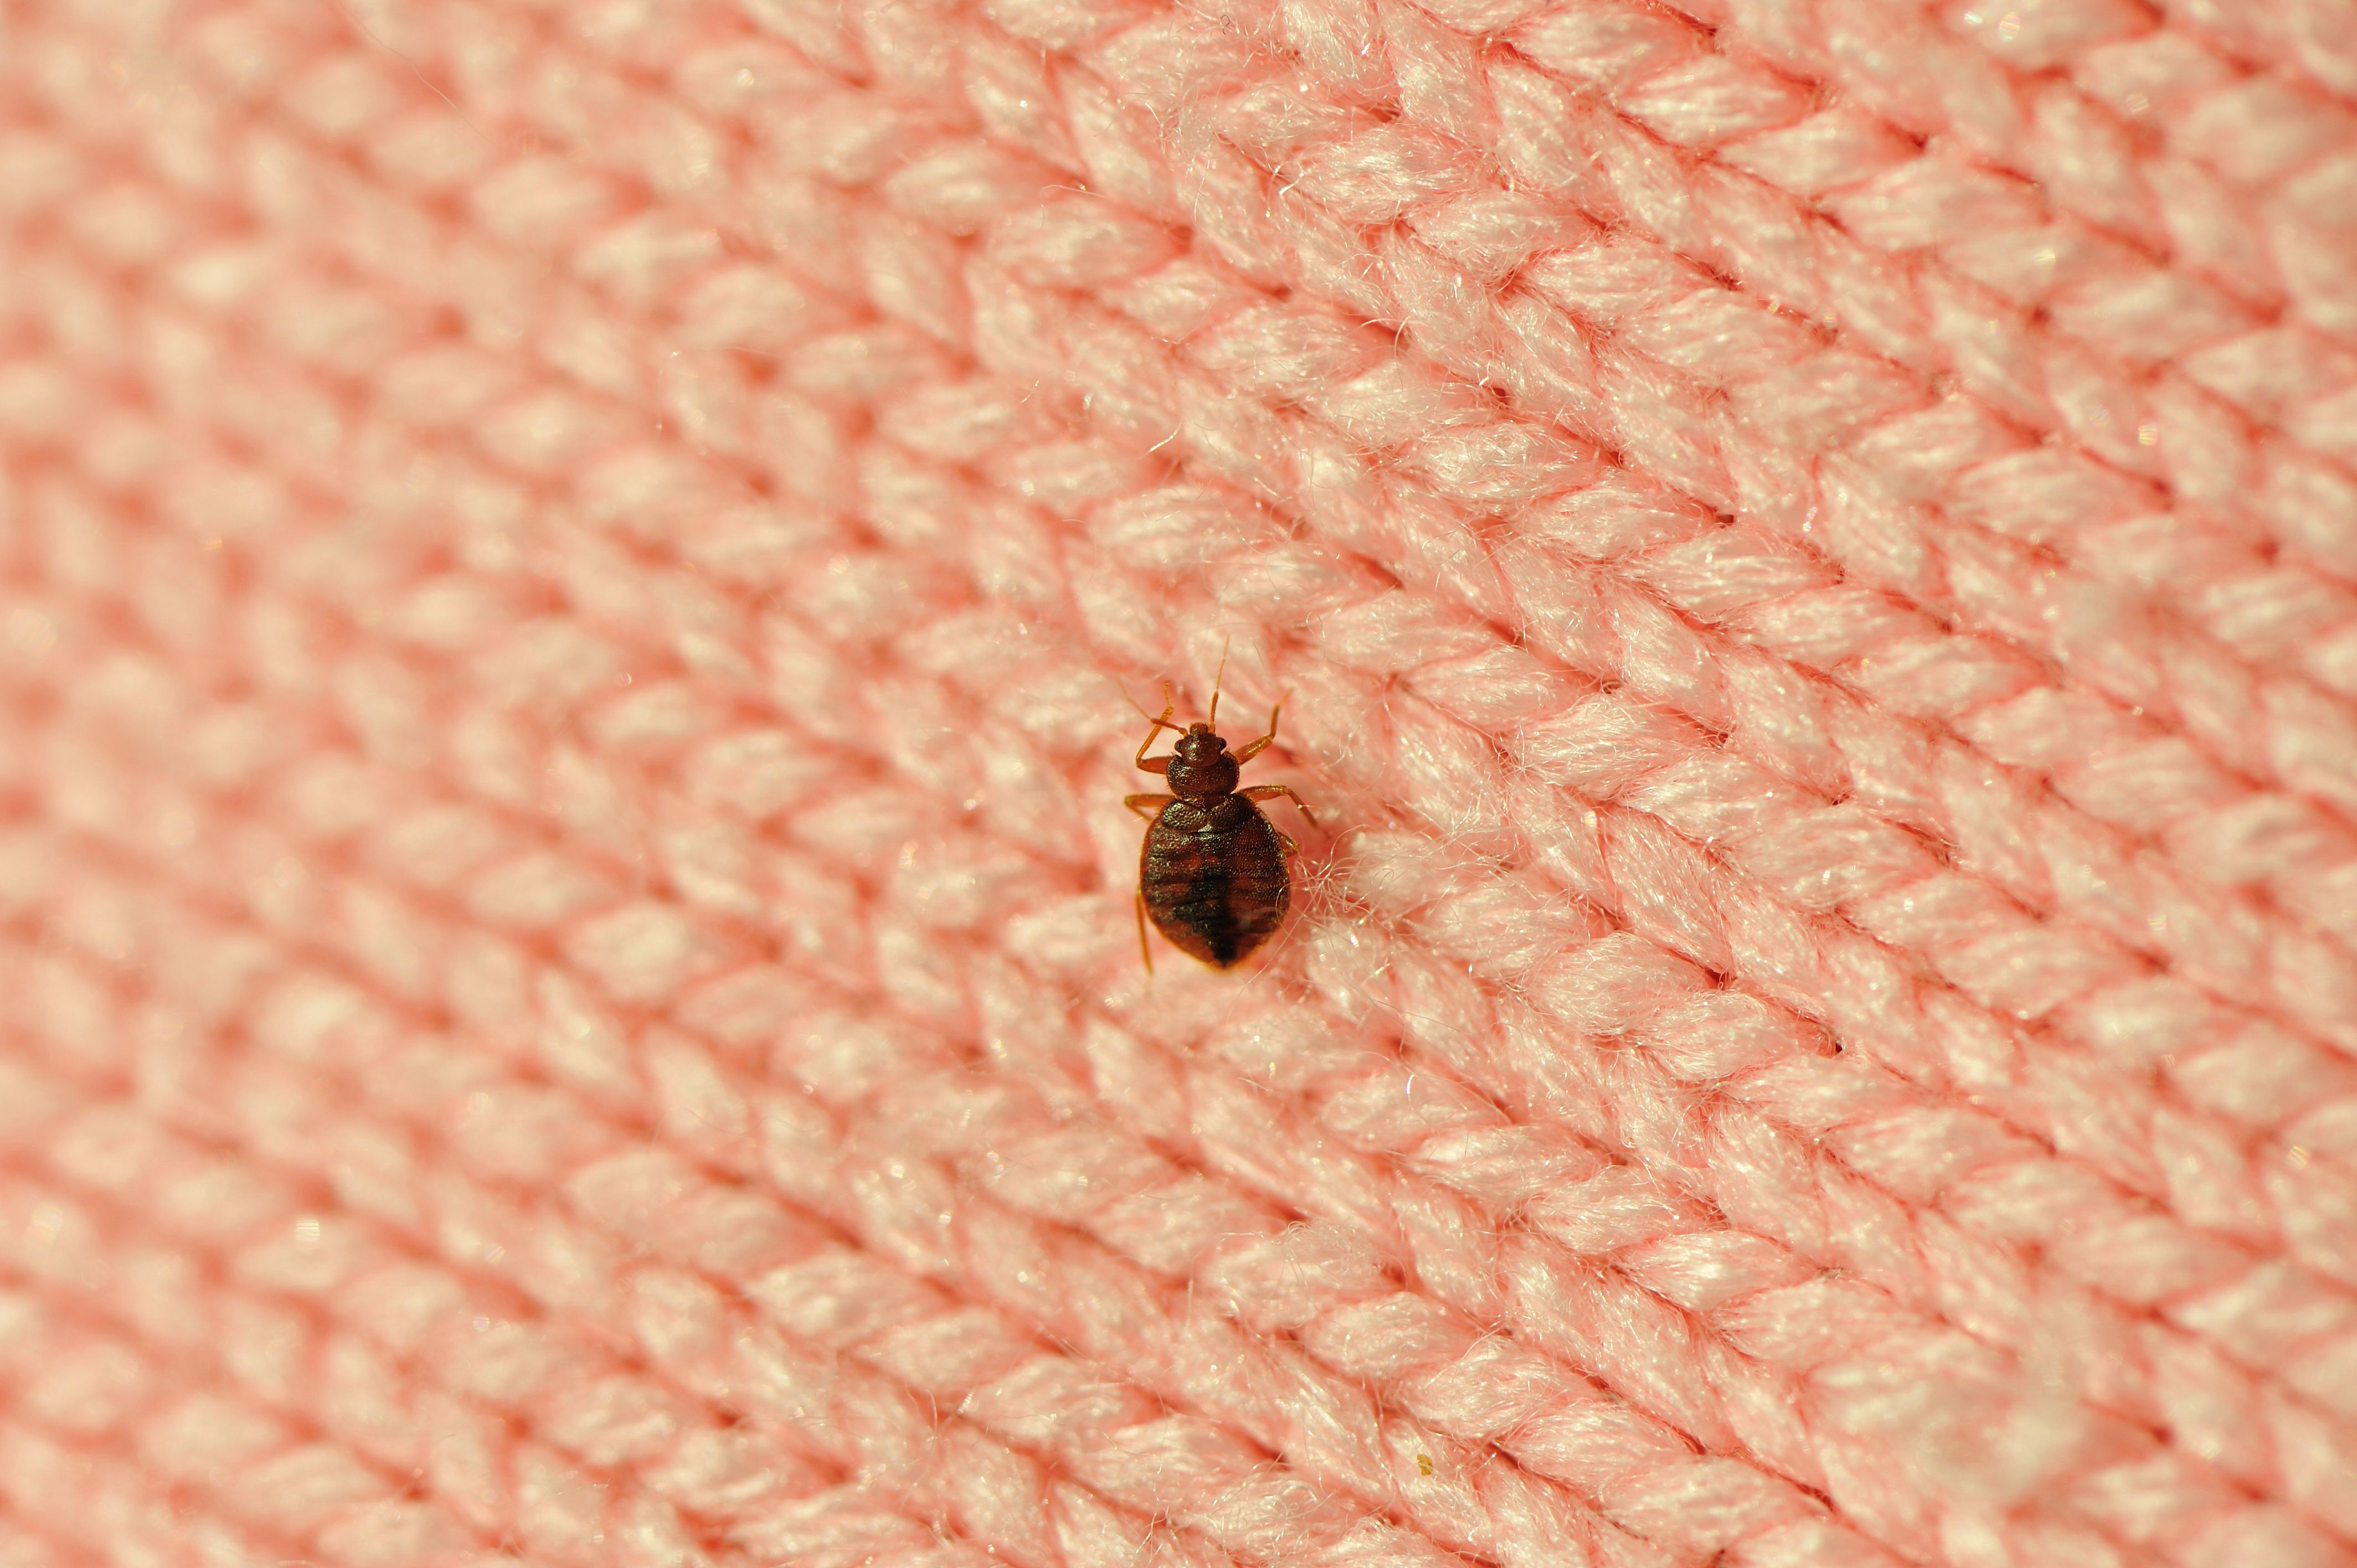 Can Bed Bugs Travel on Clothes You're Wearing